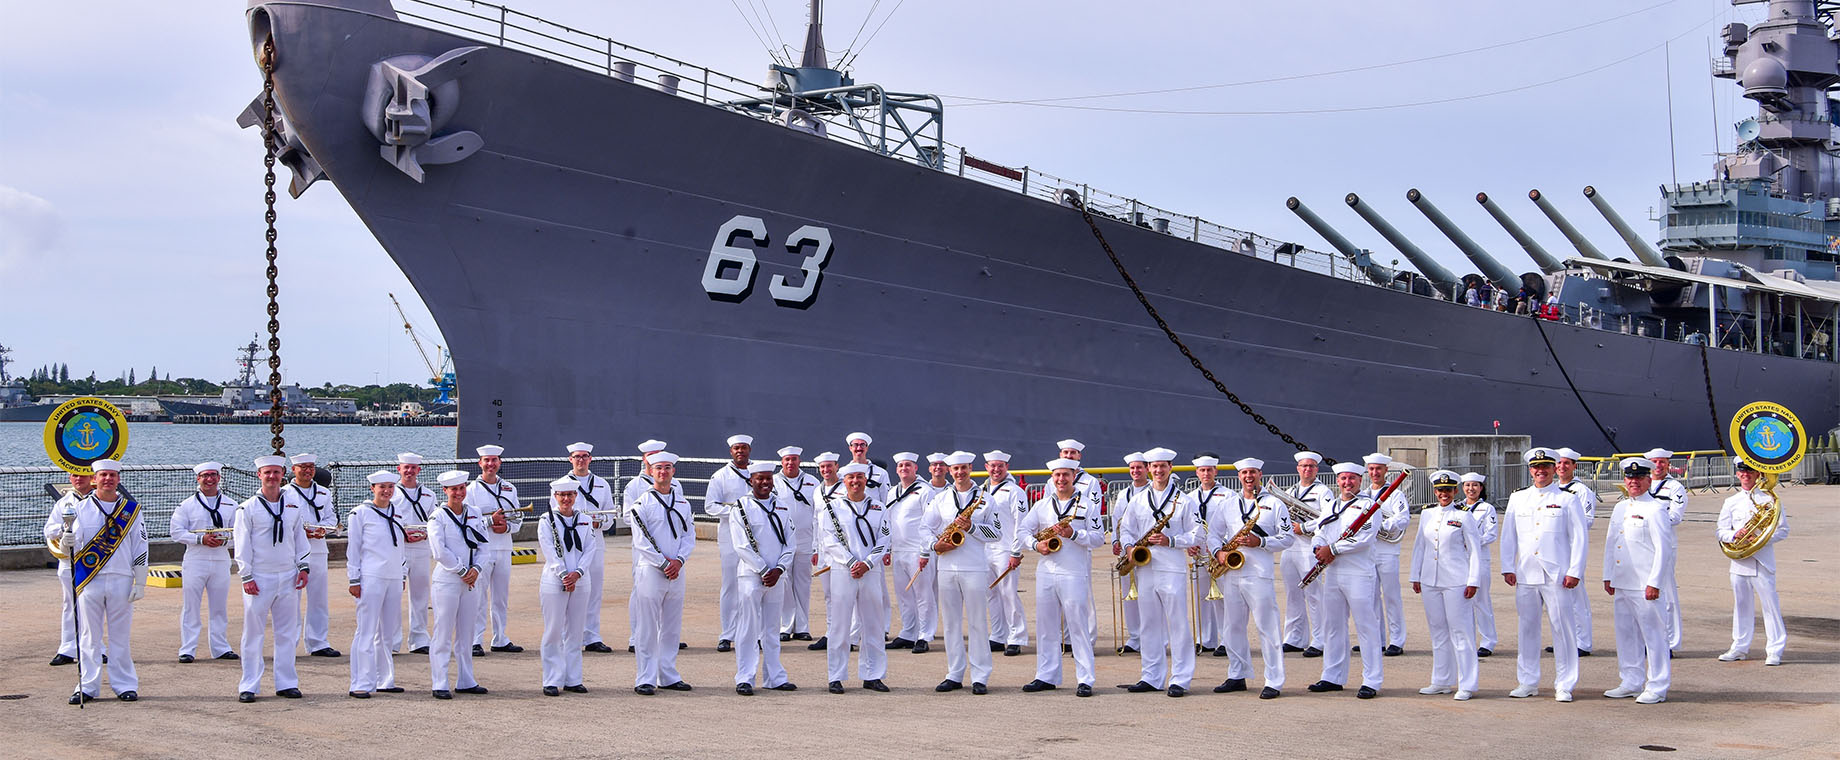 The U.S. Pacific Fleet Band wind ensemble poses in front of USS Missouri (BB 63).